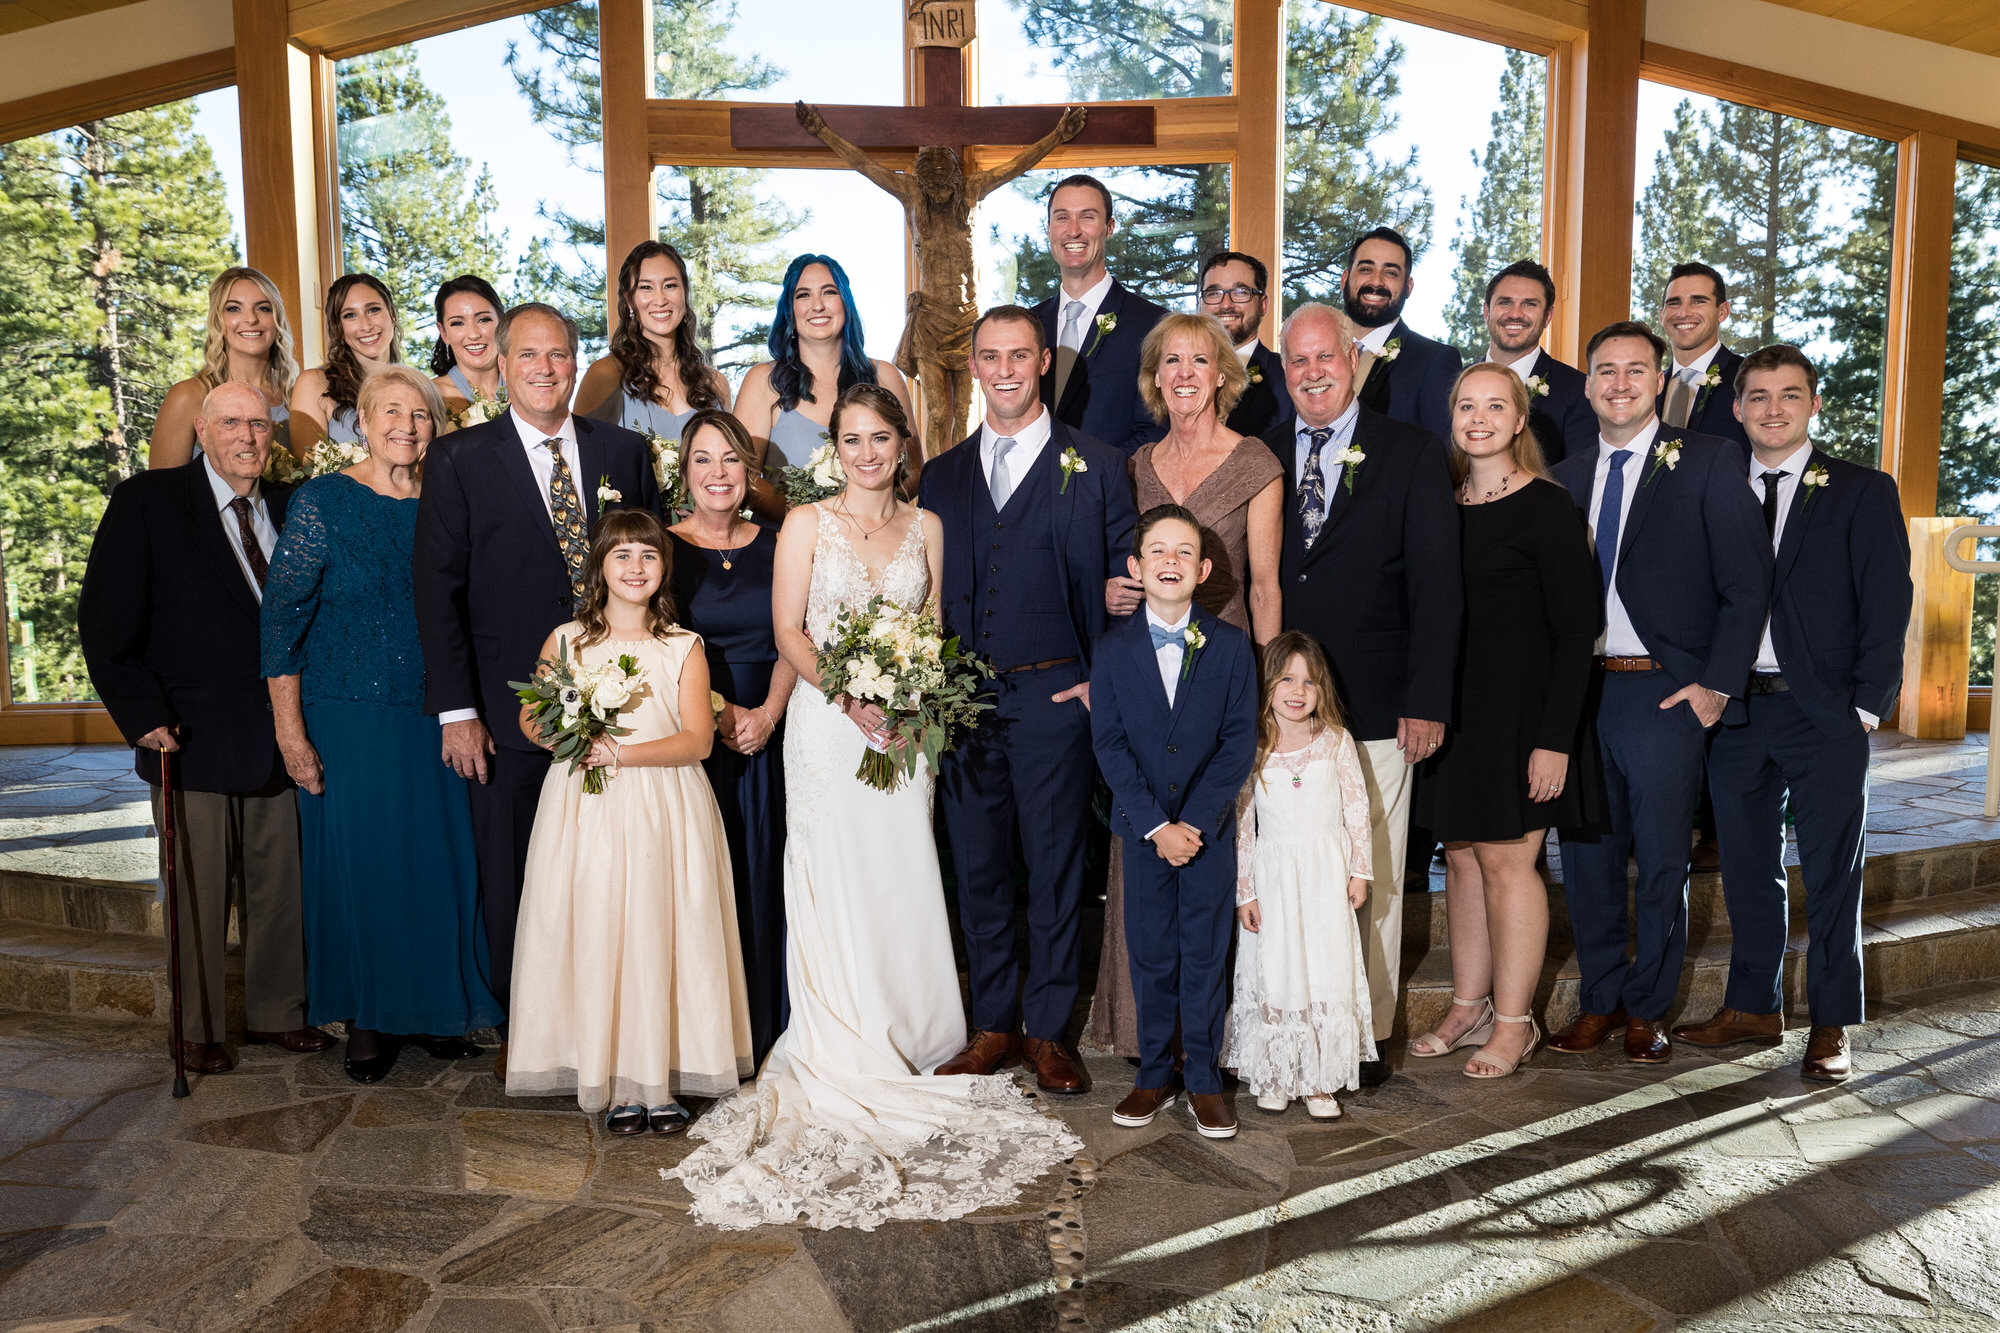 Family wedding photos at Saint Francis of Assisi Church in Incline Village.